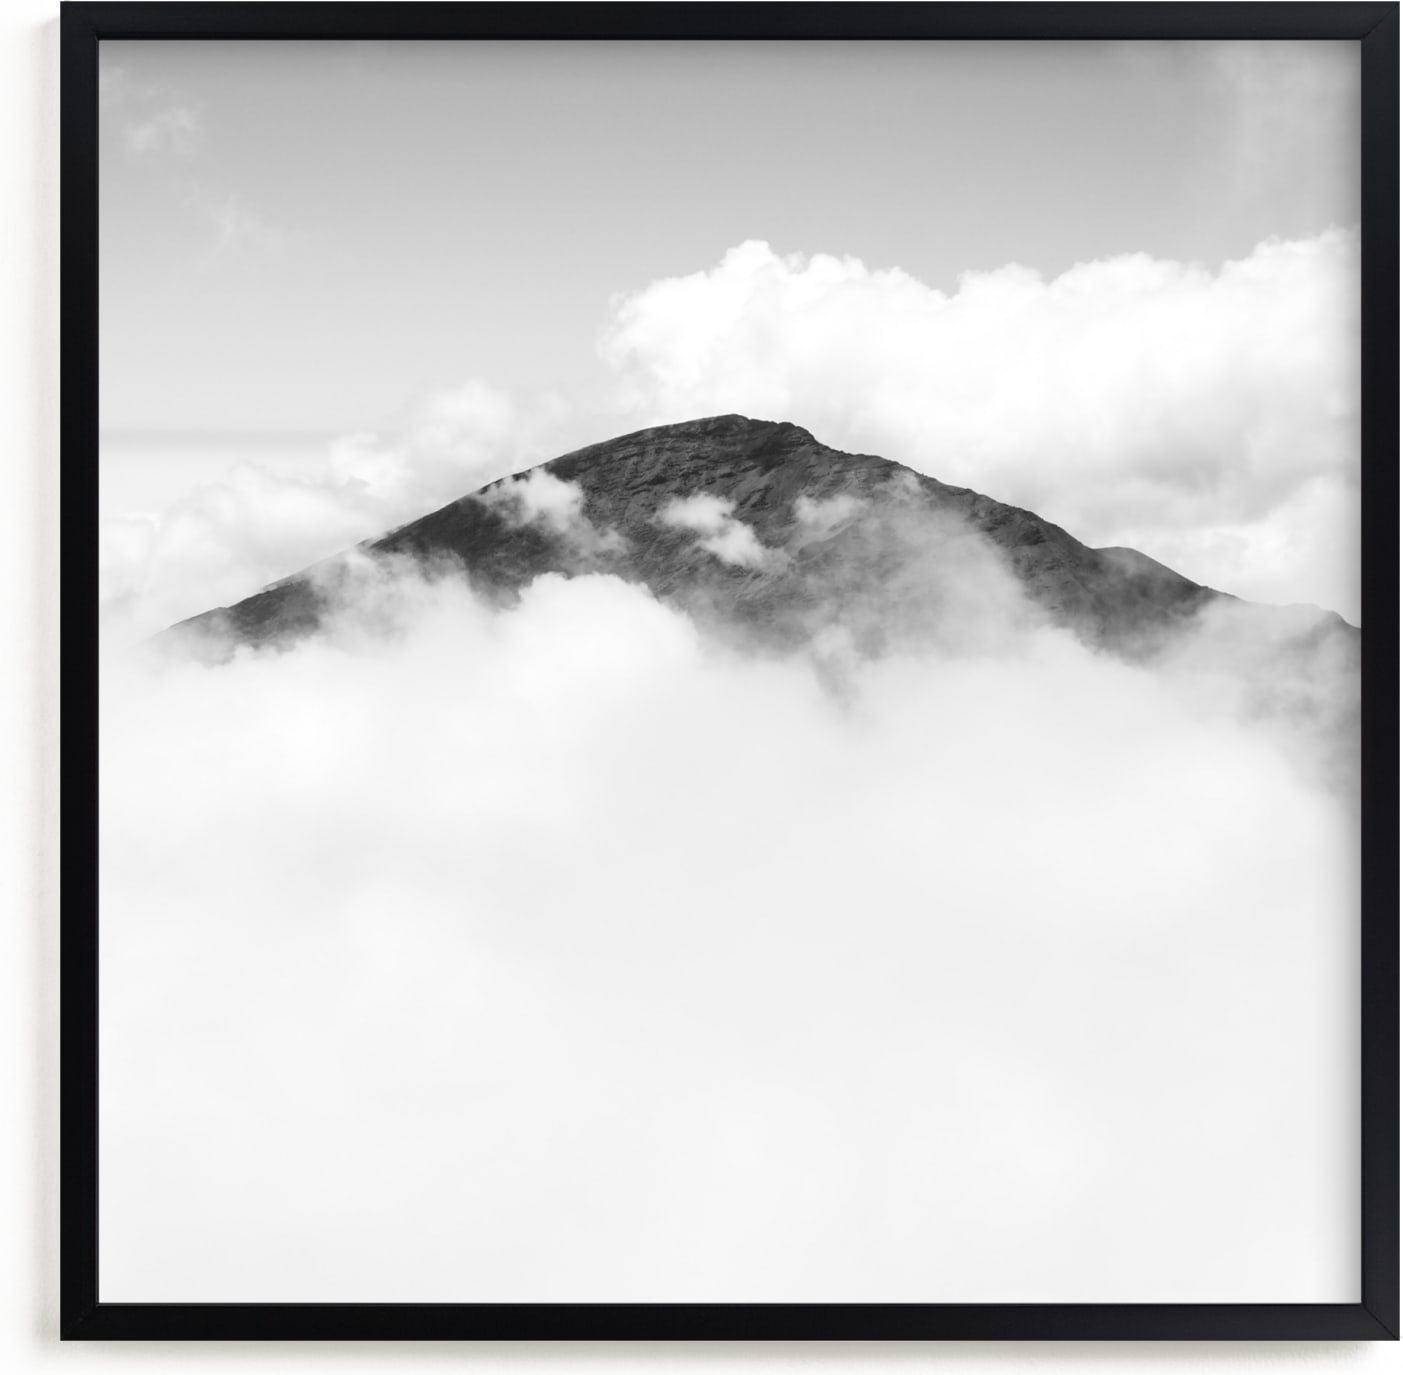 This is a black and white art by Mary Ann Glynn-Tusa called Volcano Hidden in the Clouds 3.